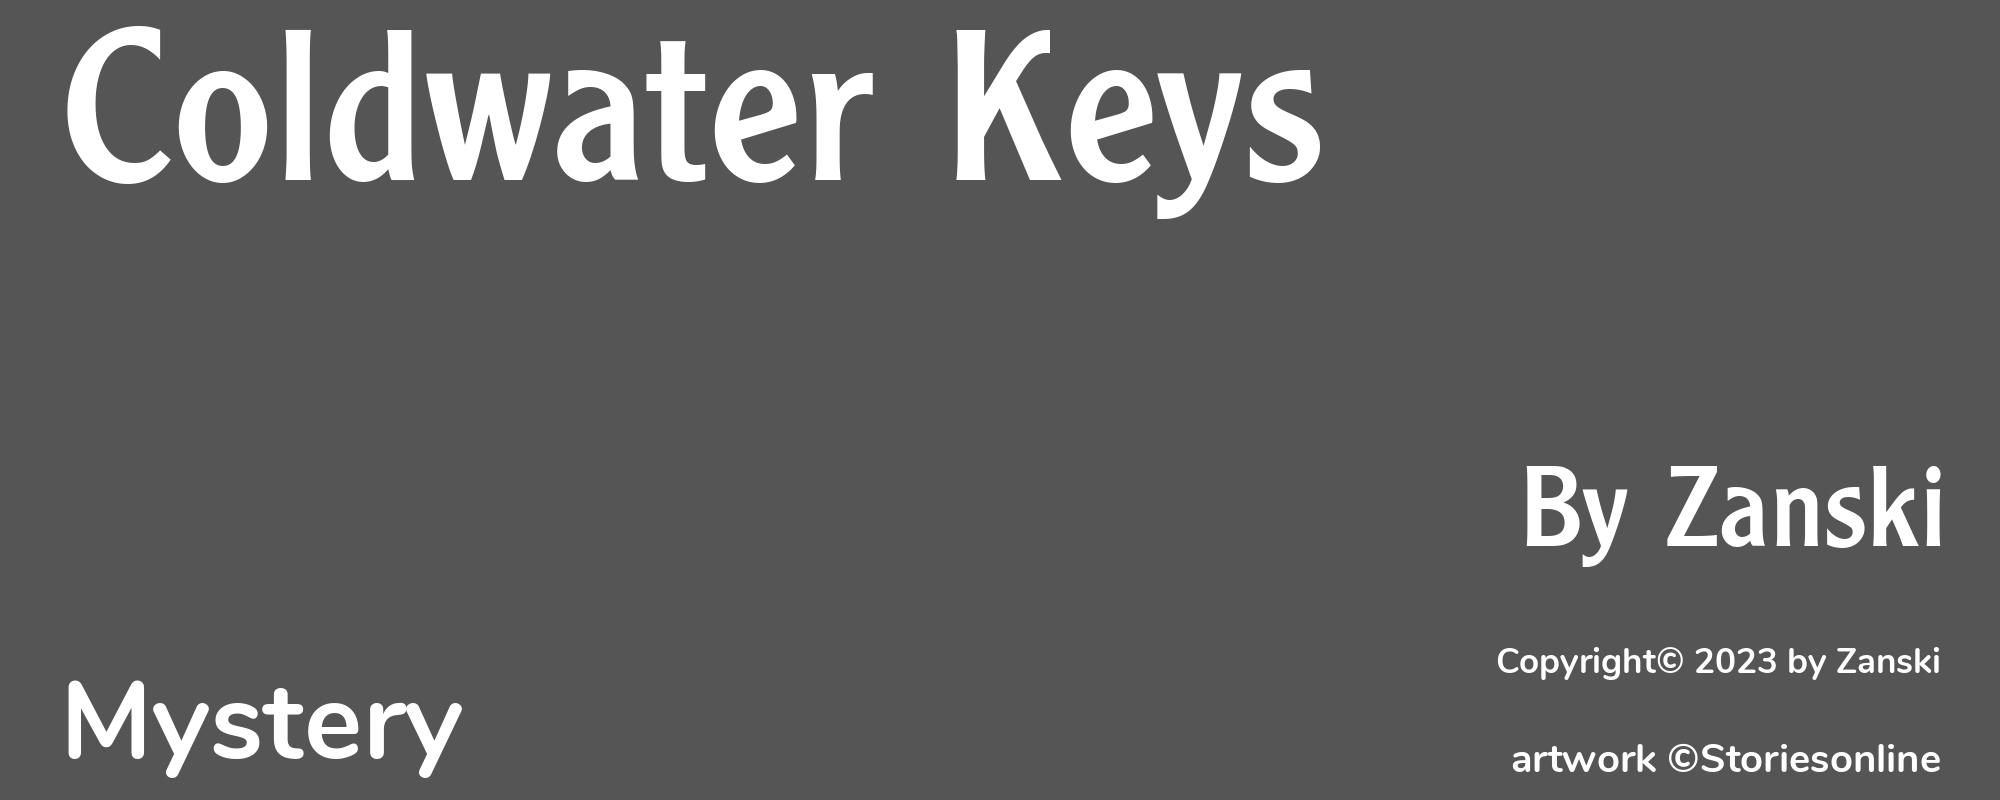 Coldwater Keys - Cover